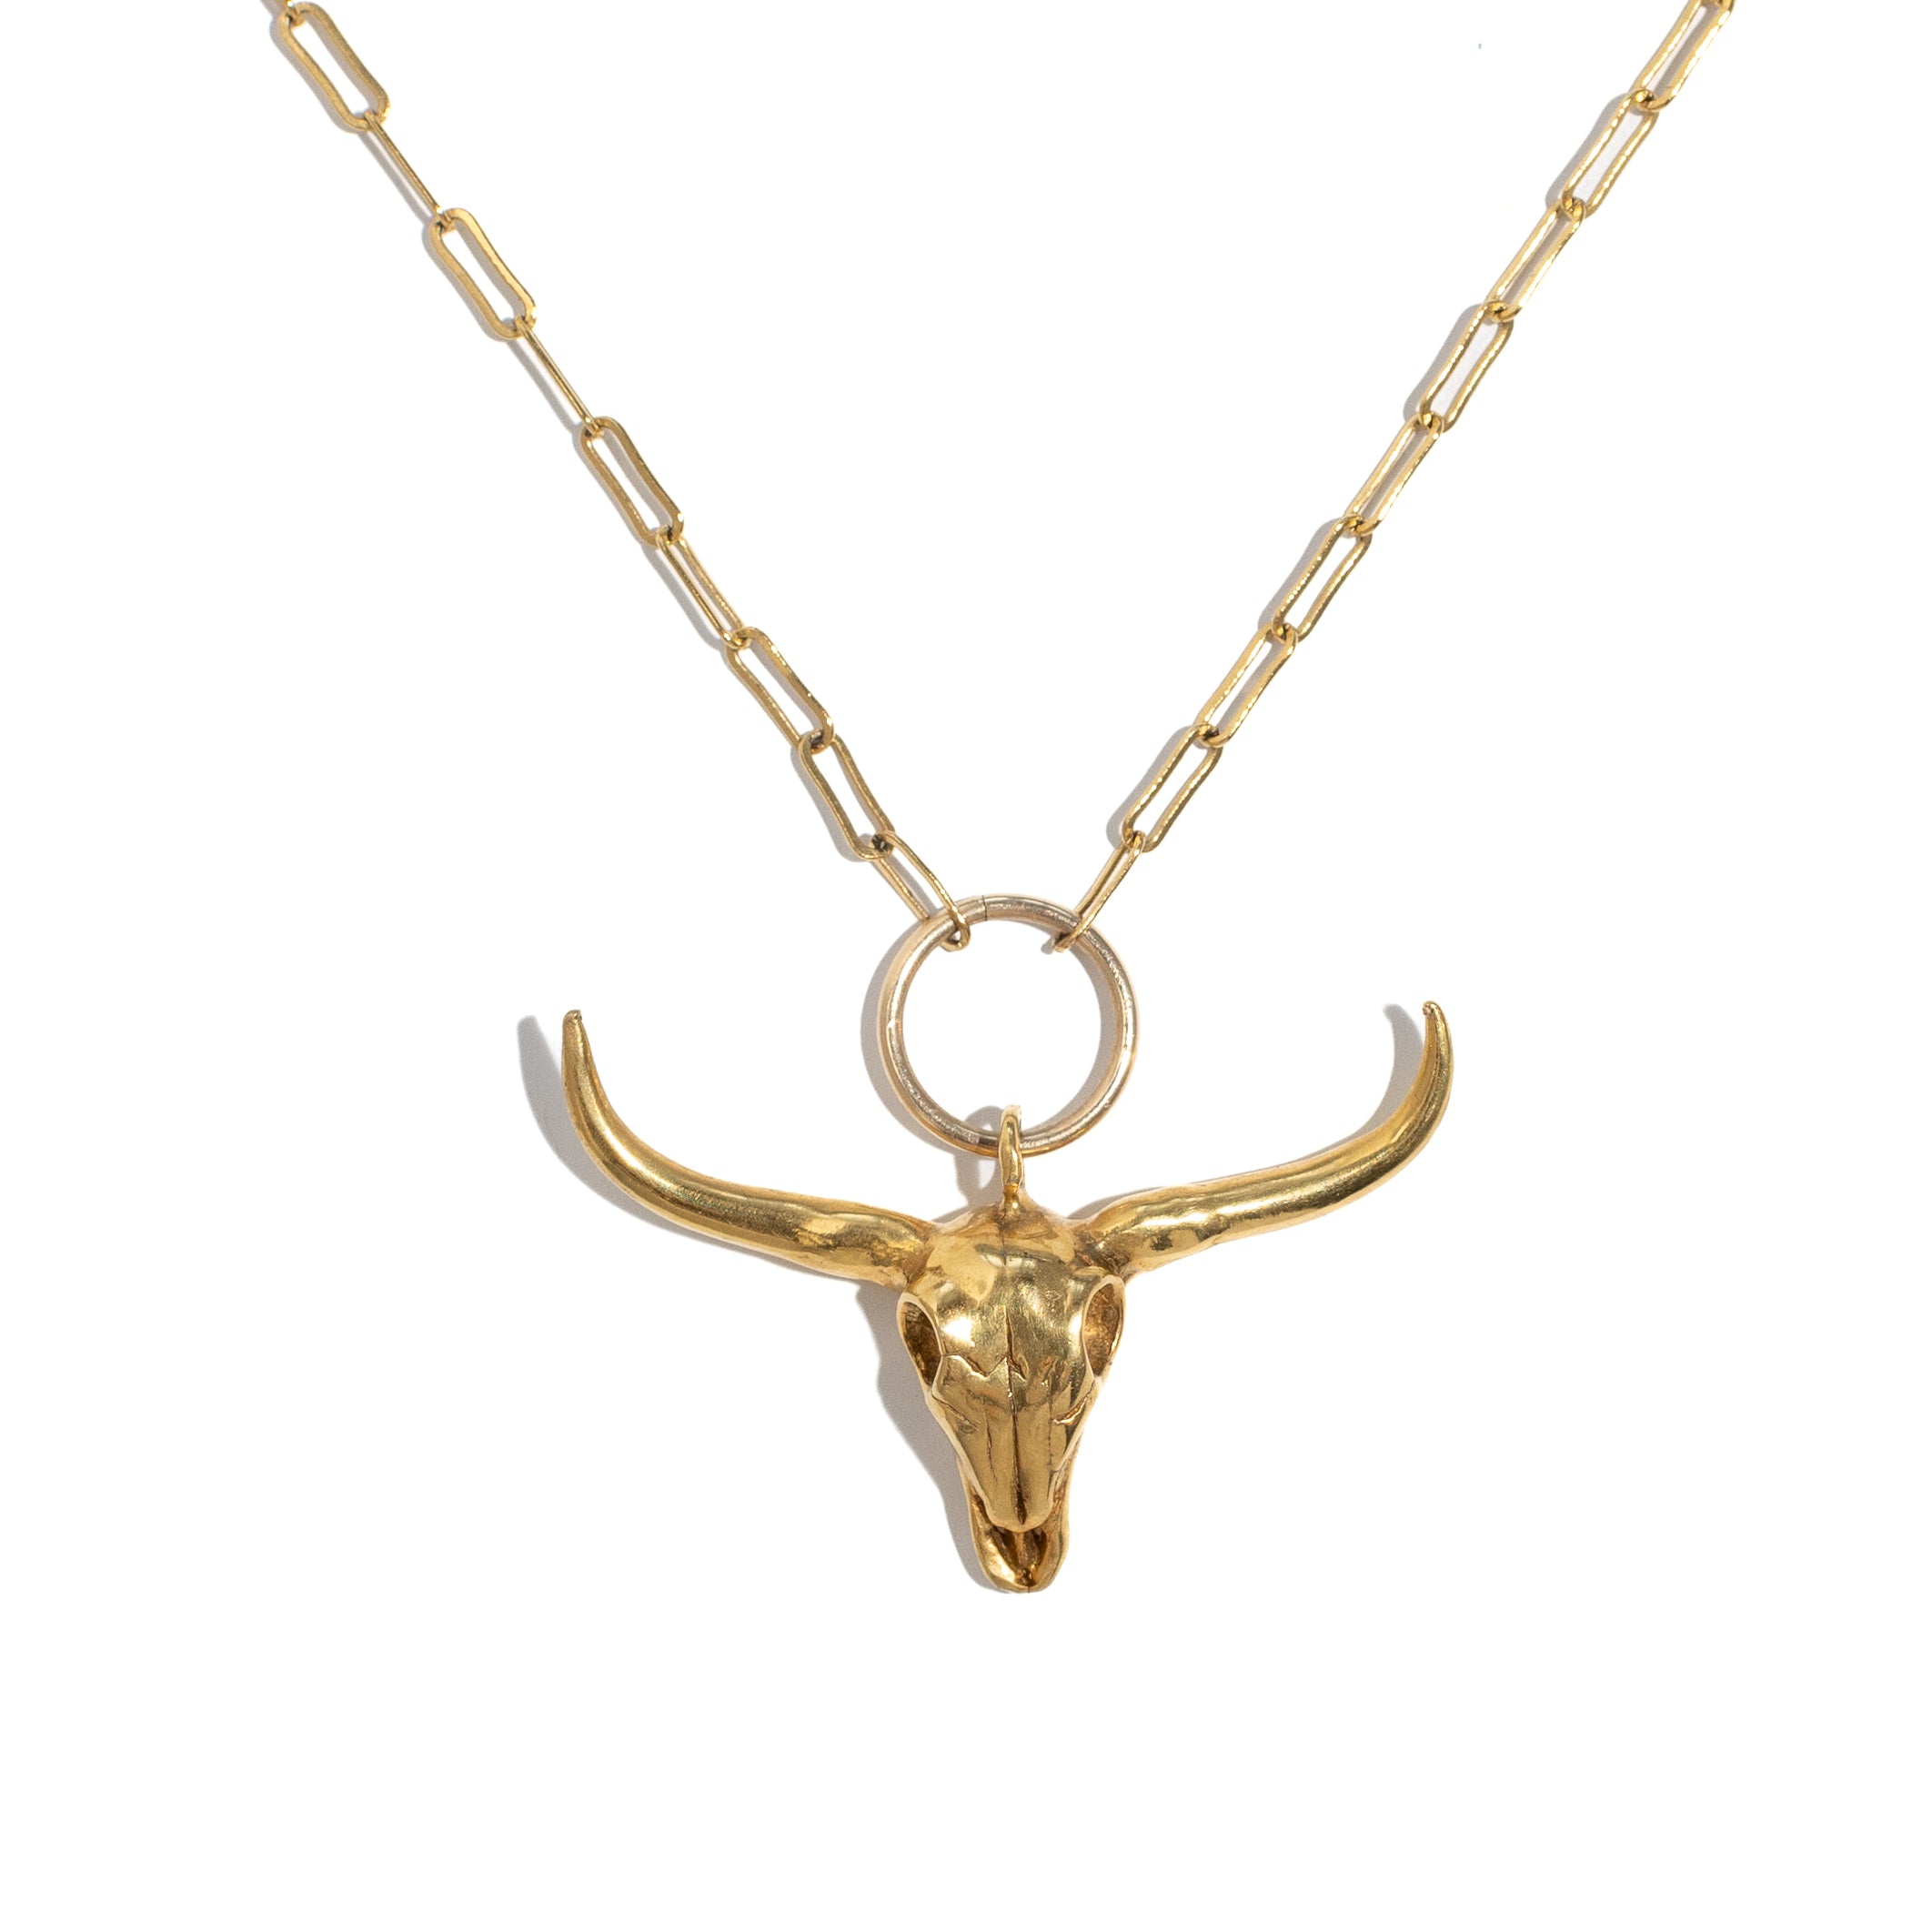 Flidais Skull Necklace - gold plate on sterling silver